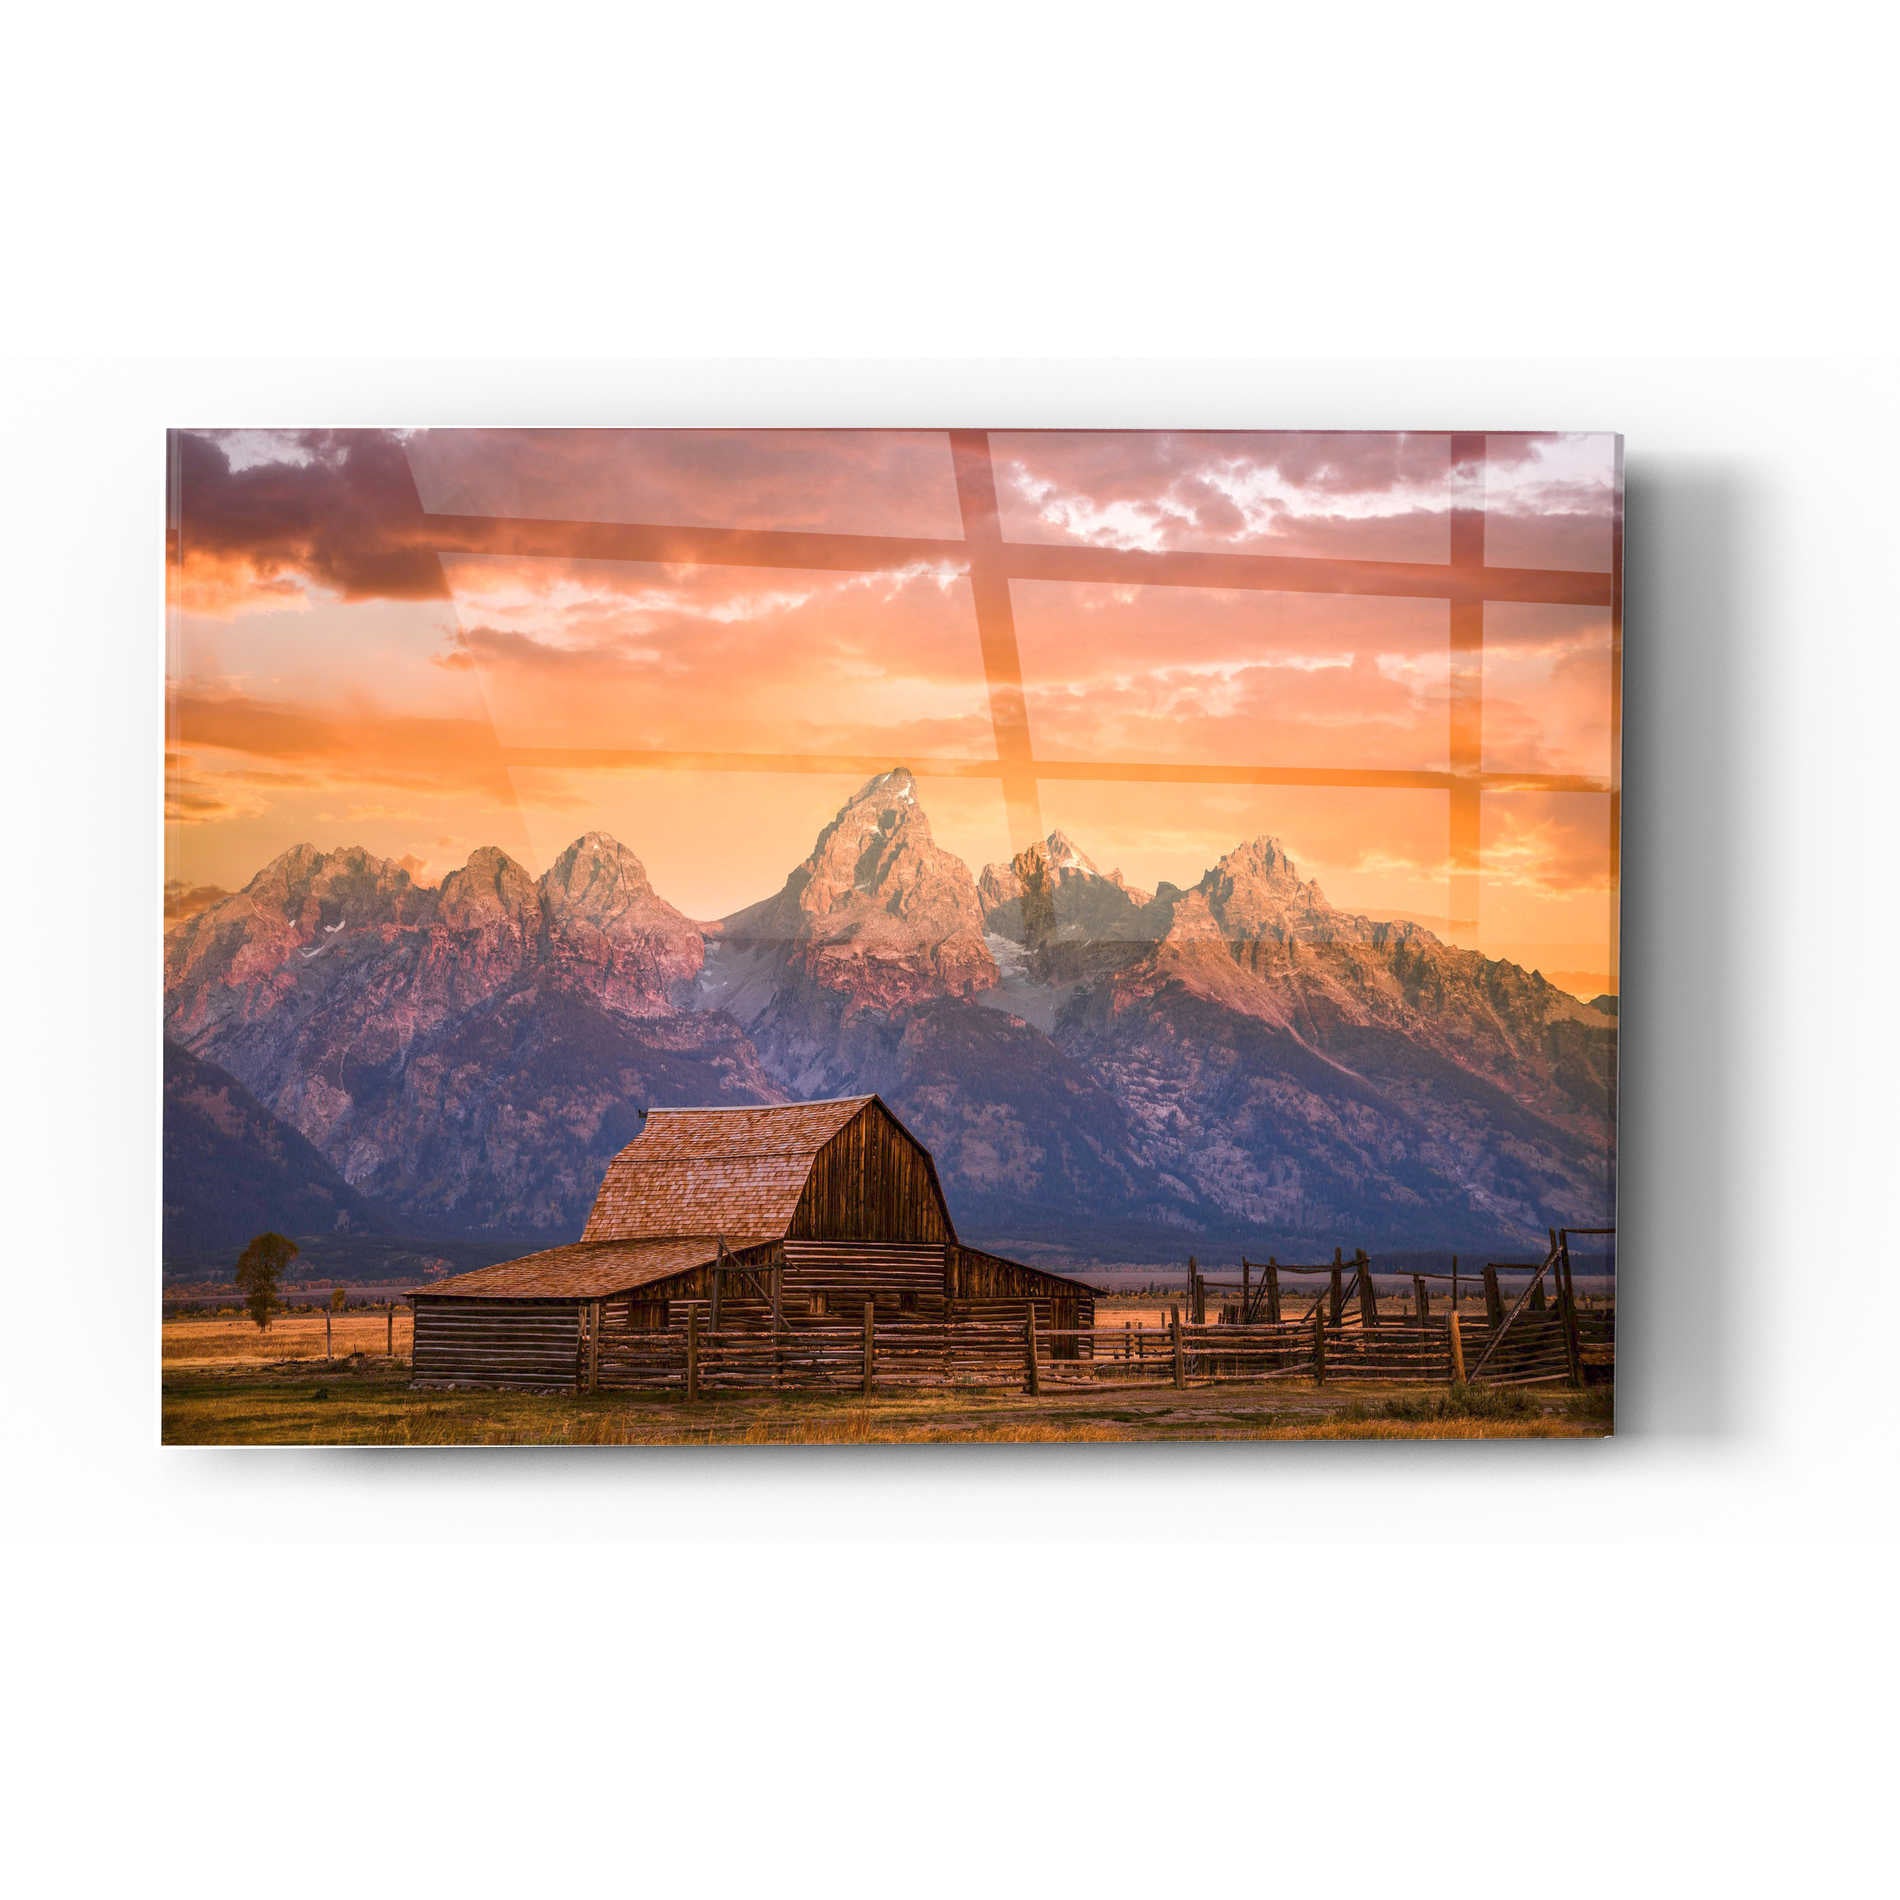 Epic Art "Sunrise on the Ranch" by Darren White, Acrylic Glass Wall Art,24x36